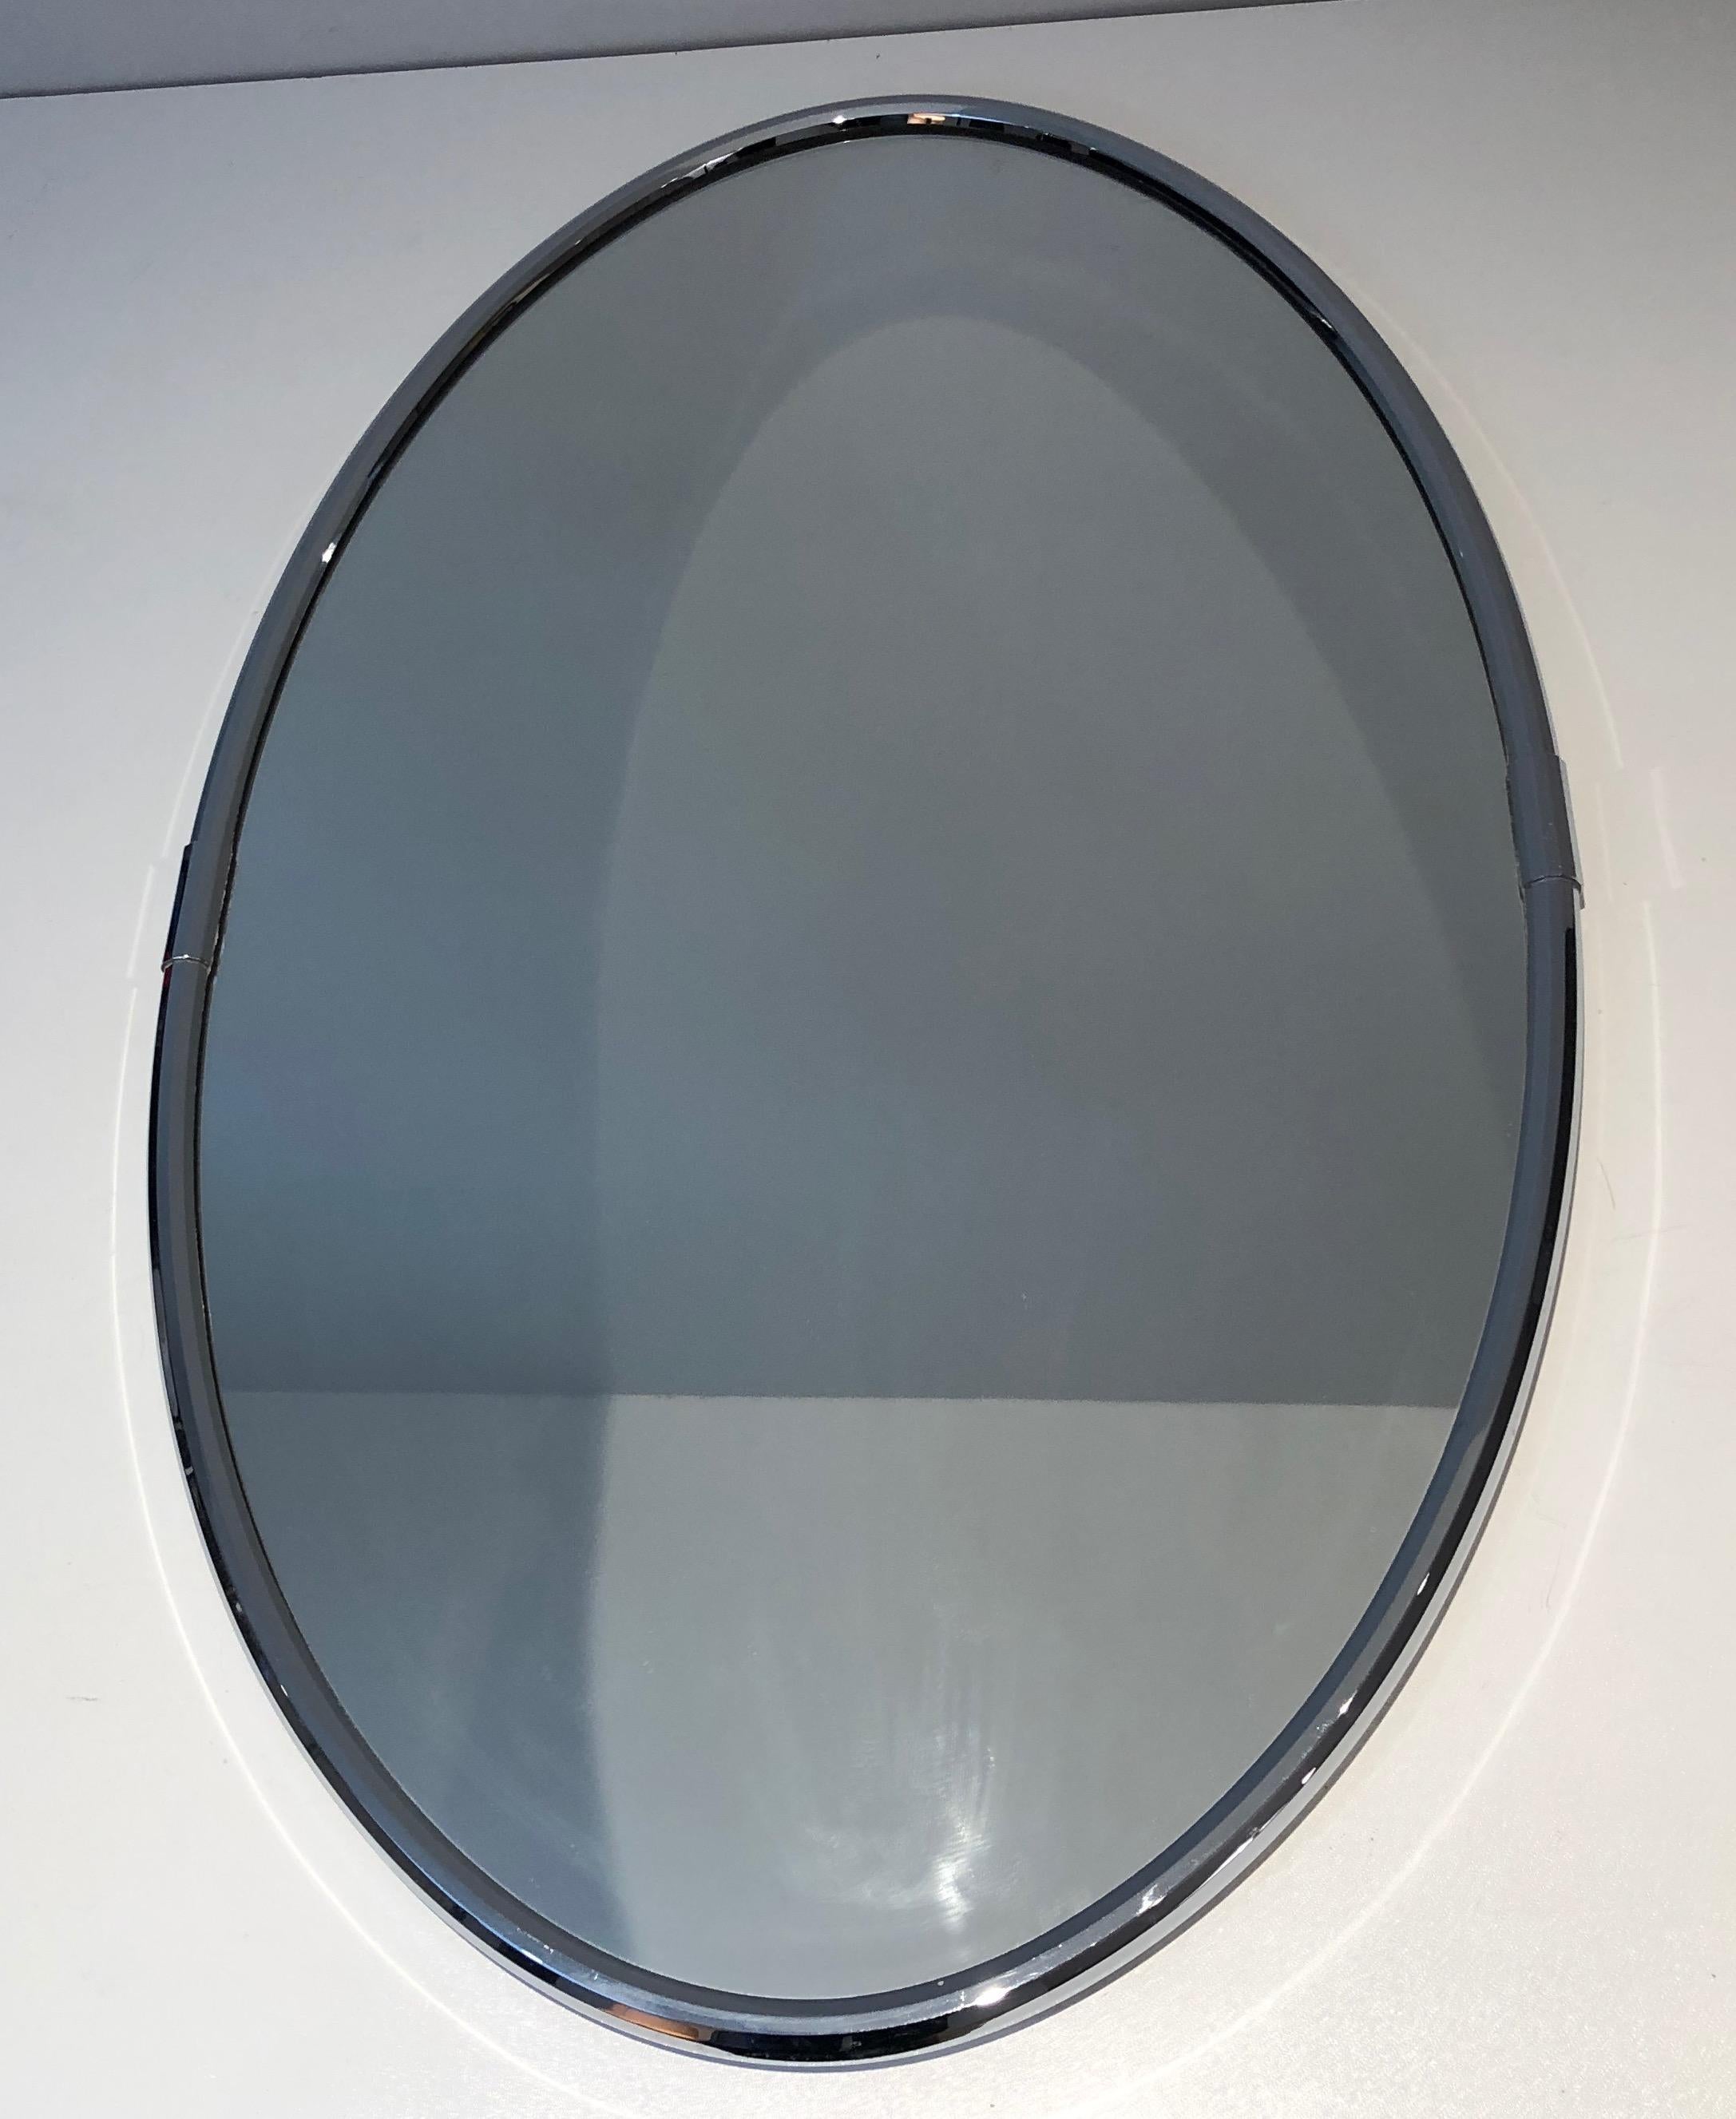 Mid-Century Modern Chromed Oval Mirror in the Art Deco Style For Sale